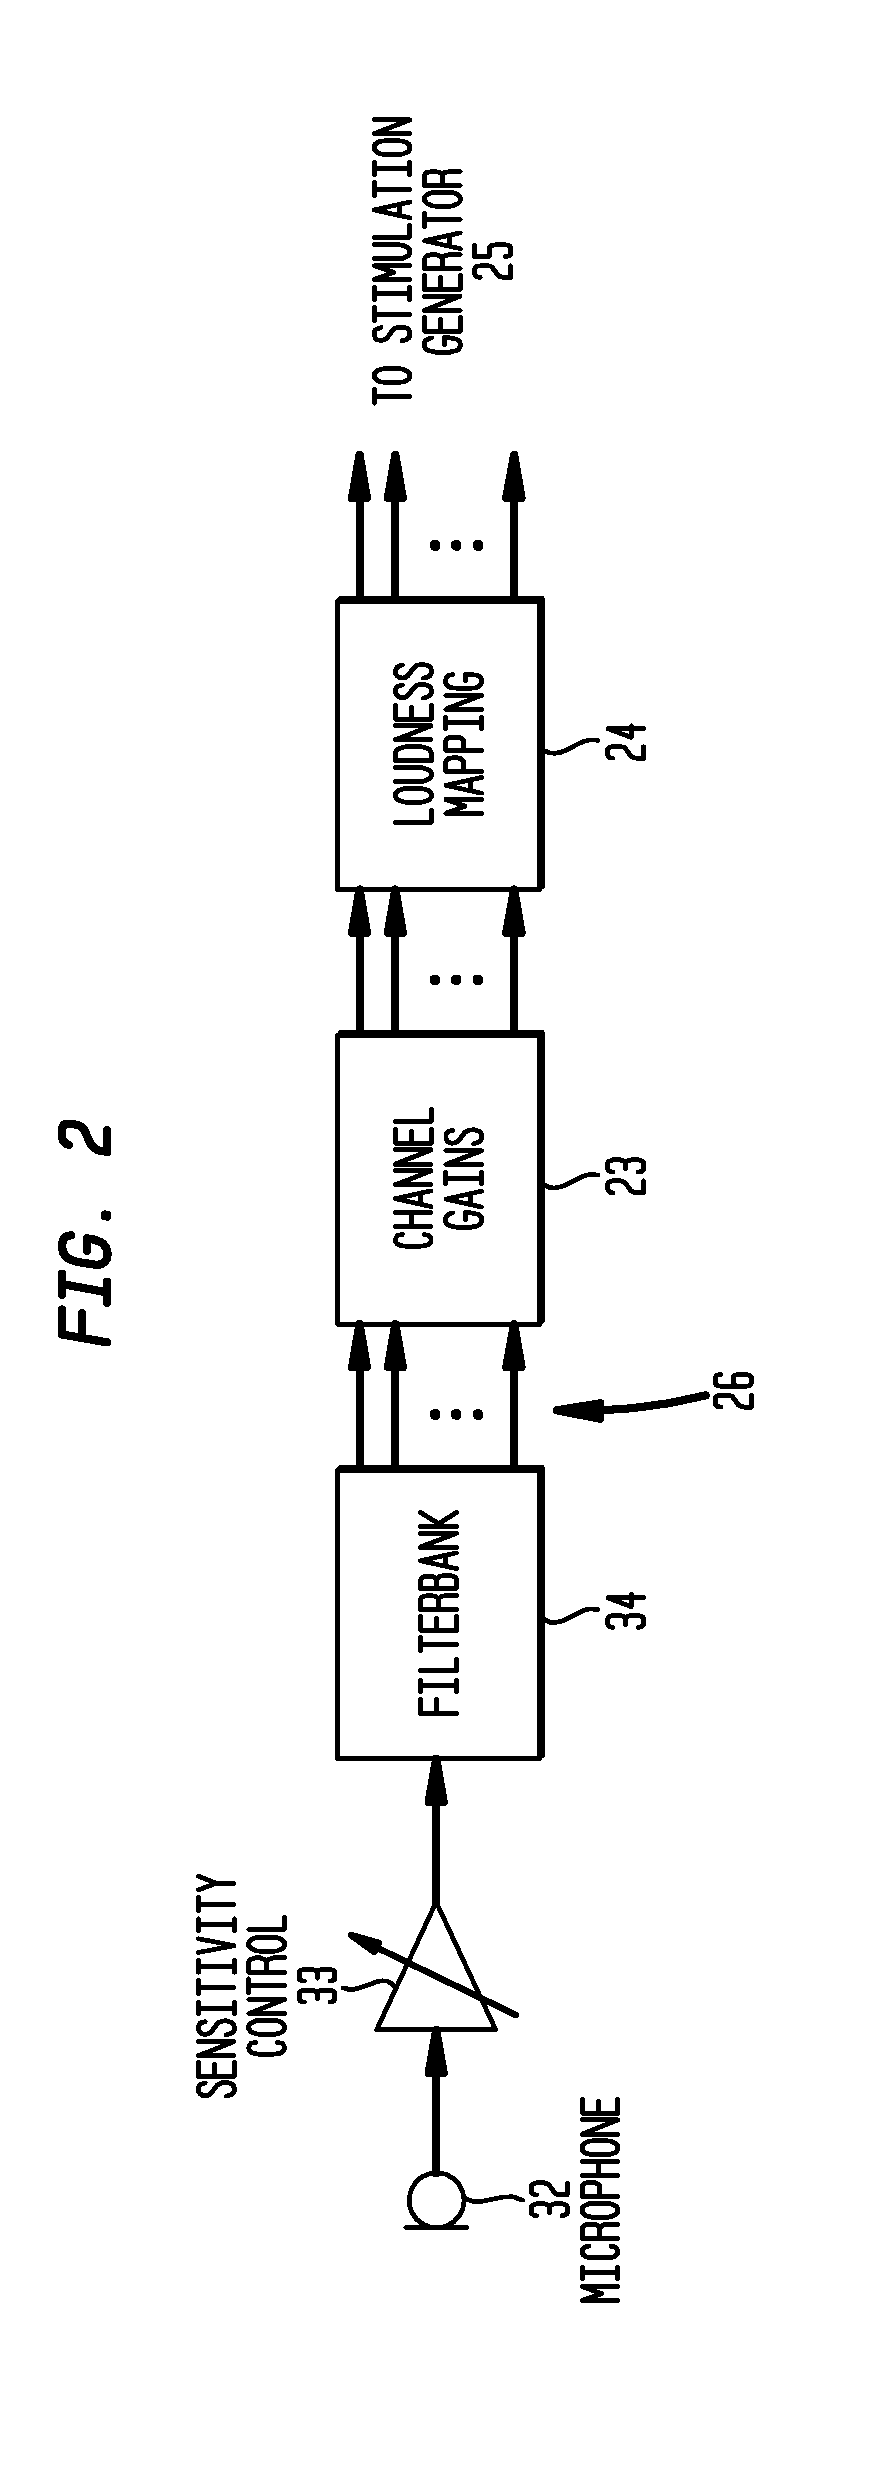 Acoustic processing method and apparatus